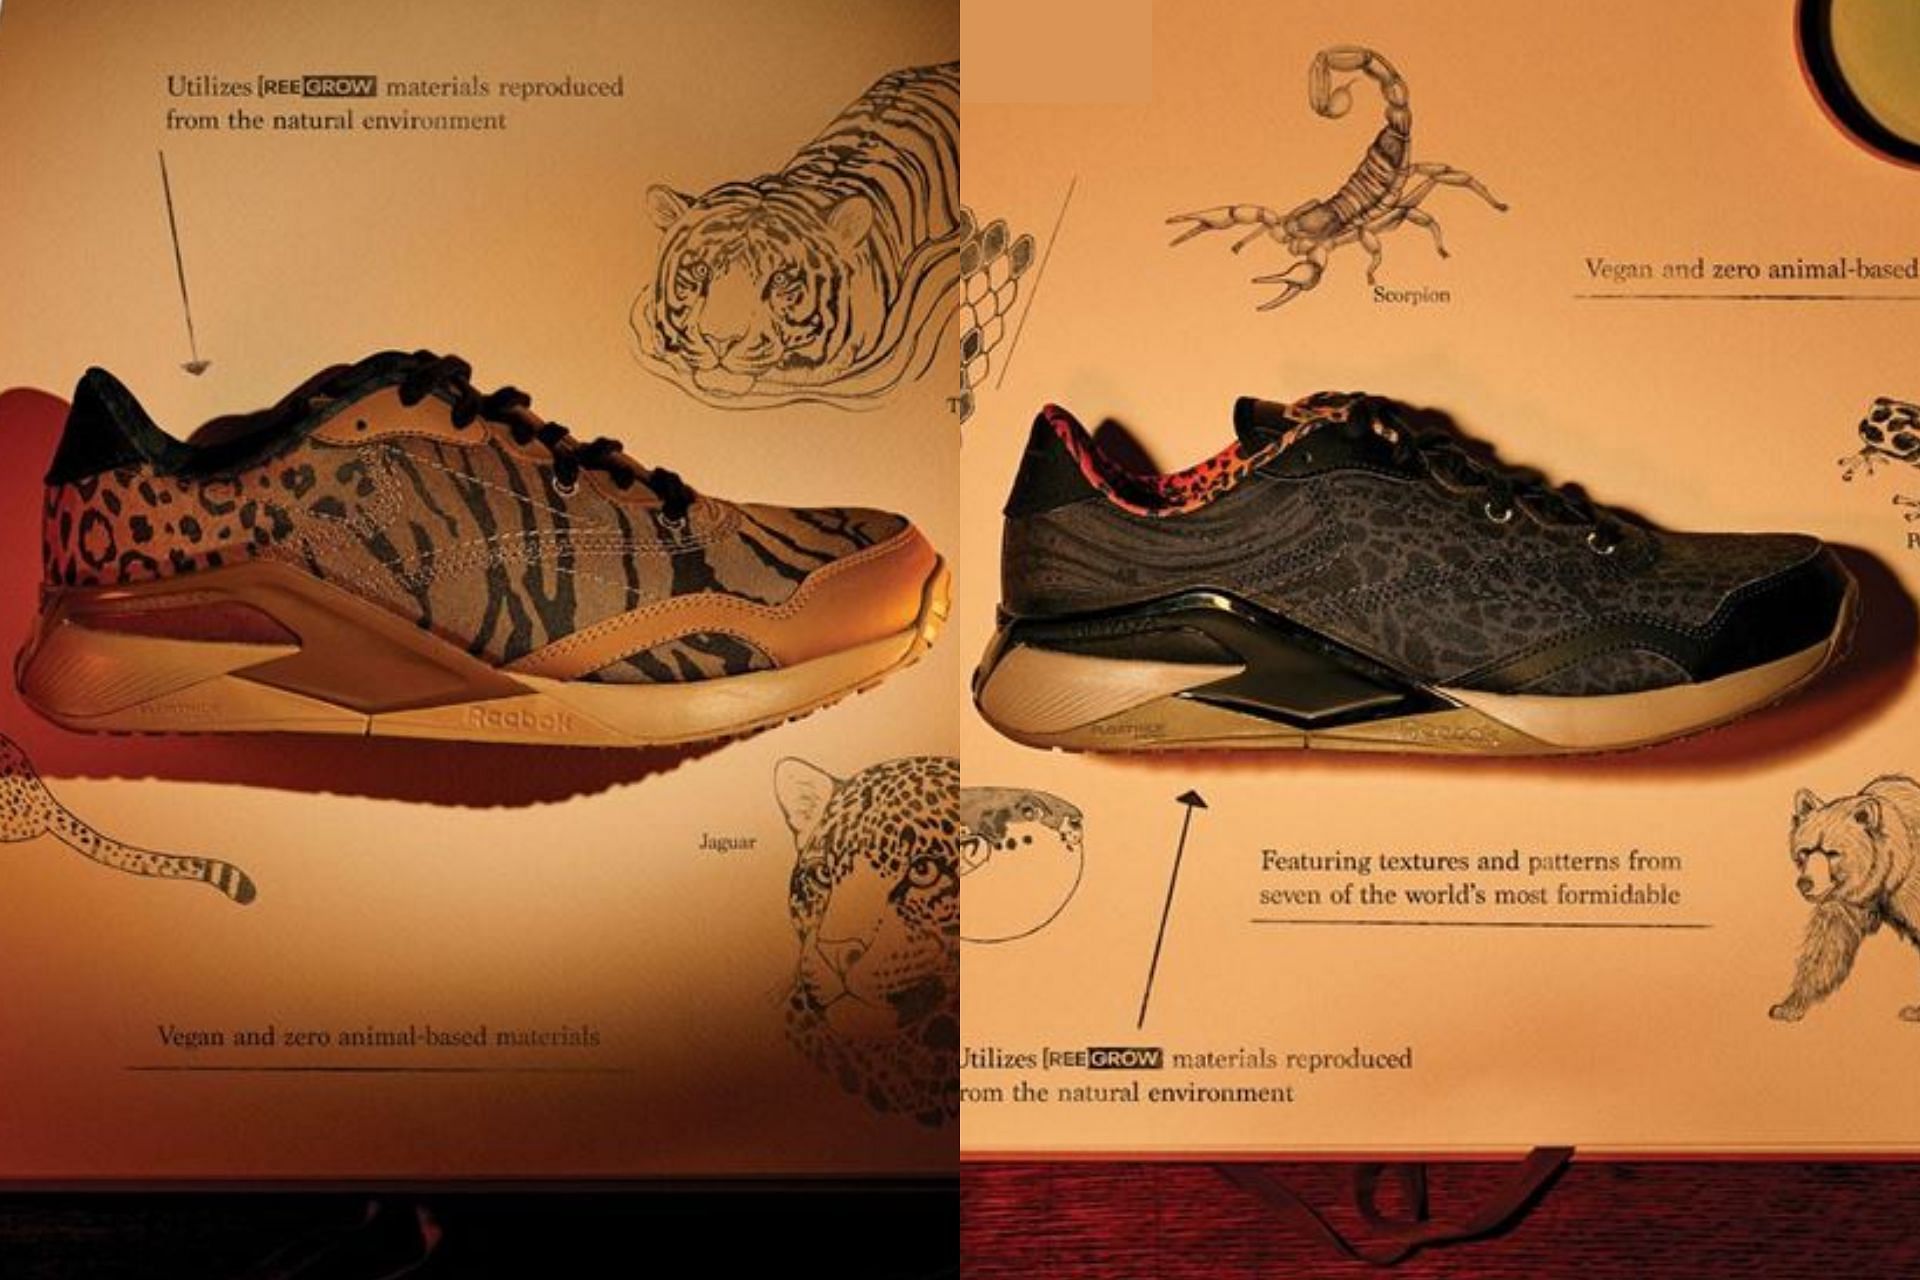 Newly launched Reebok x National Geographic footwear collection consisting of two makeovers of Nano X2 Grow and Club C 85 Vegan (Image via Reebok)